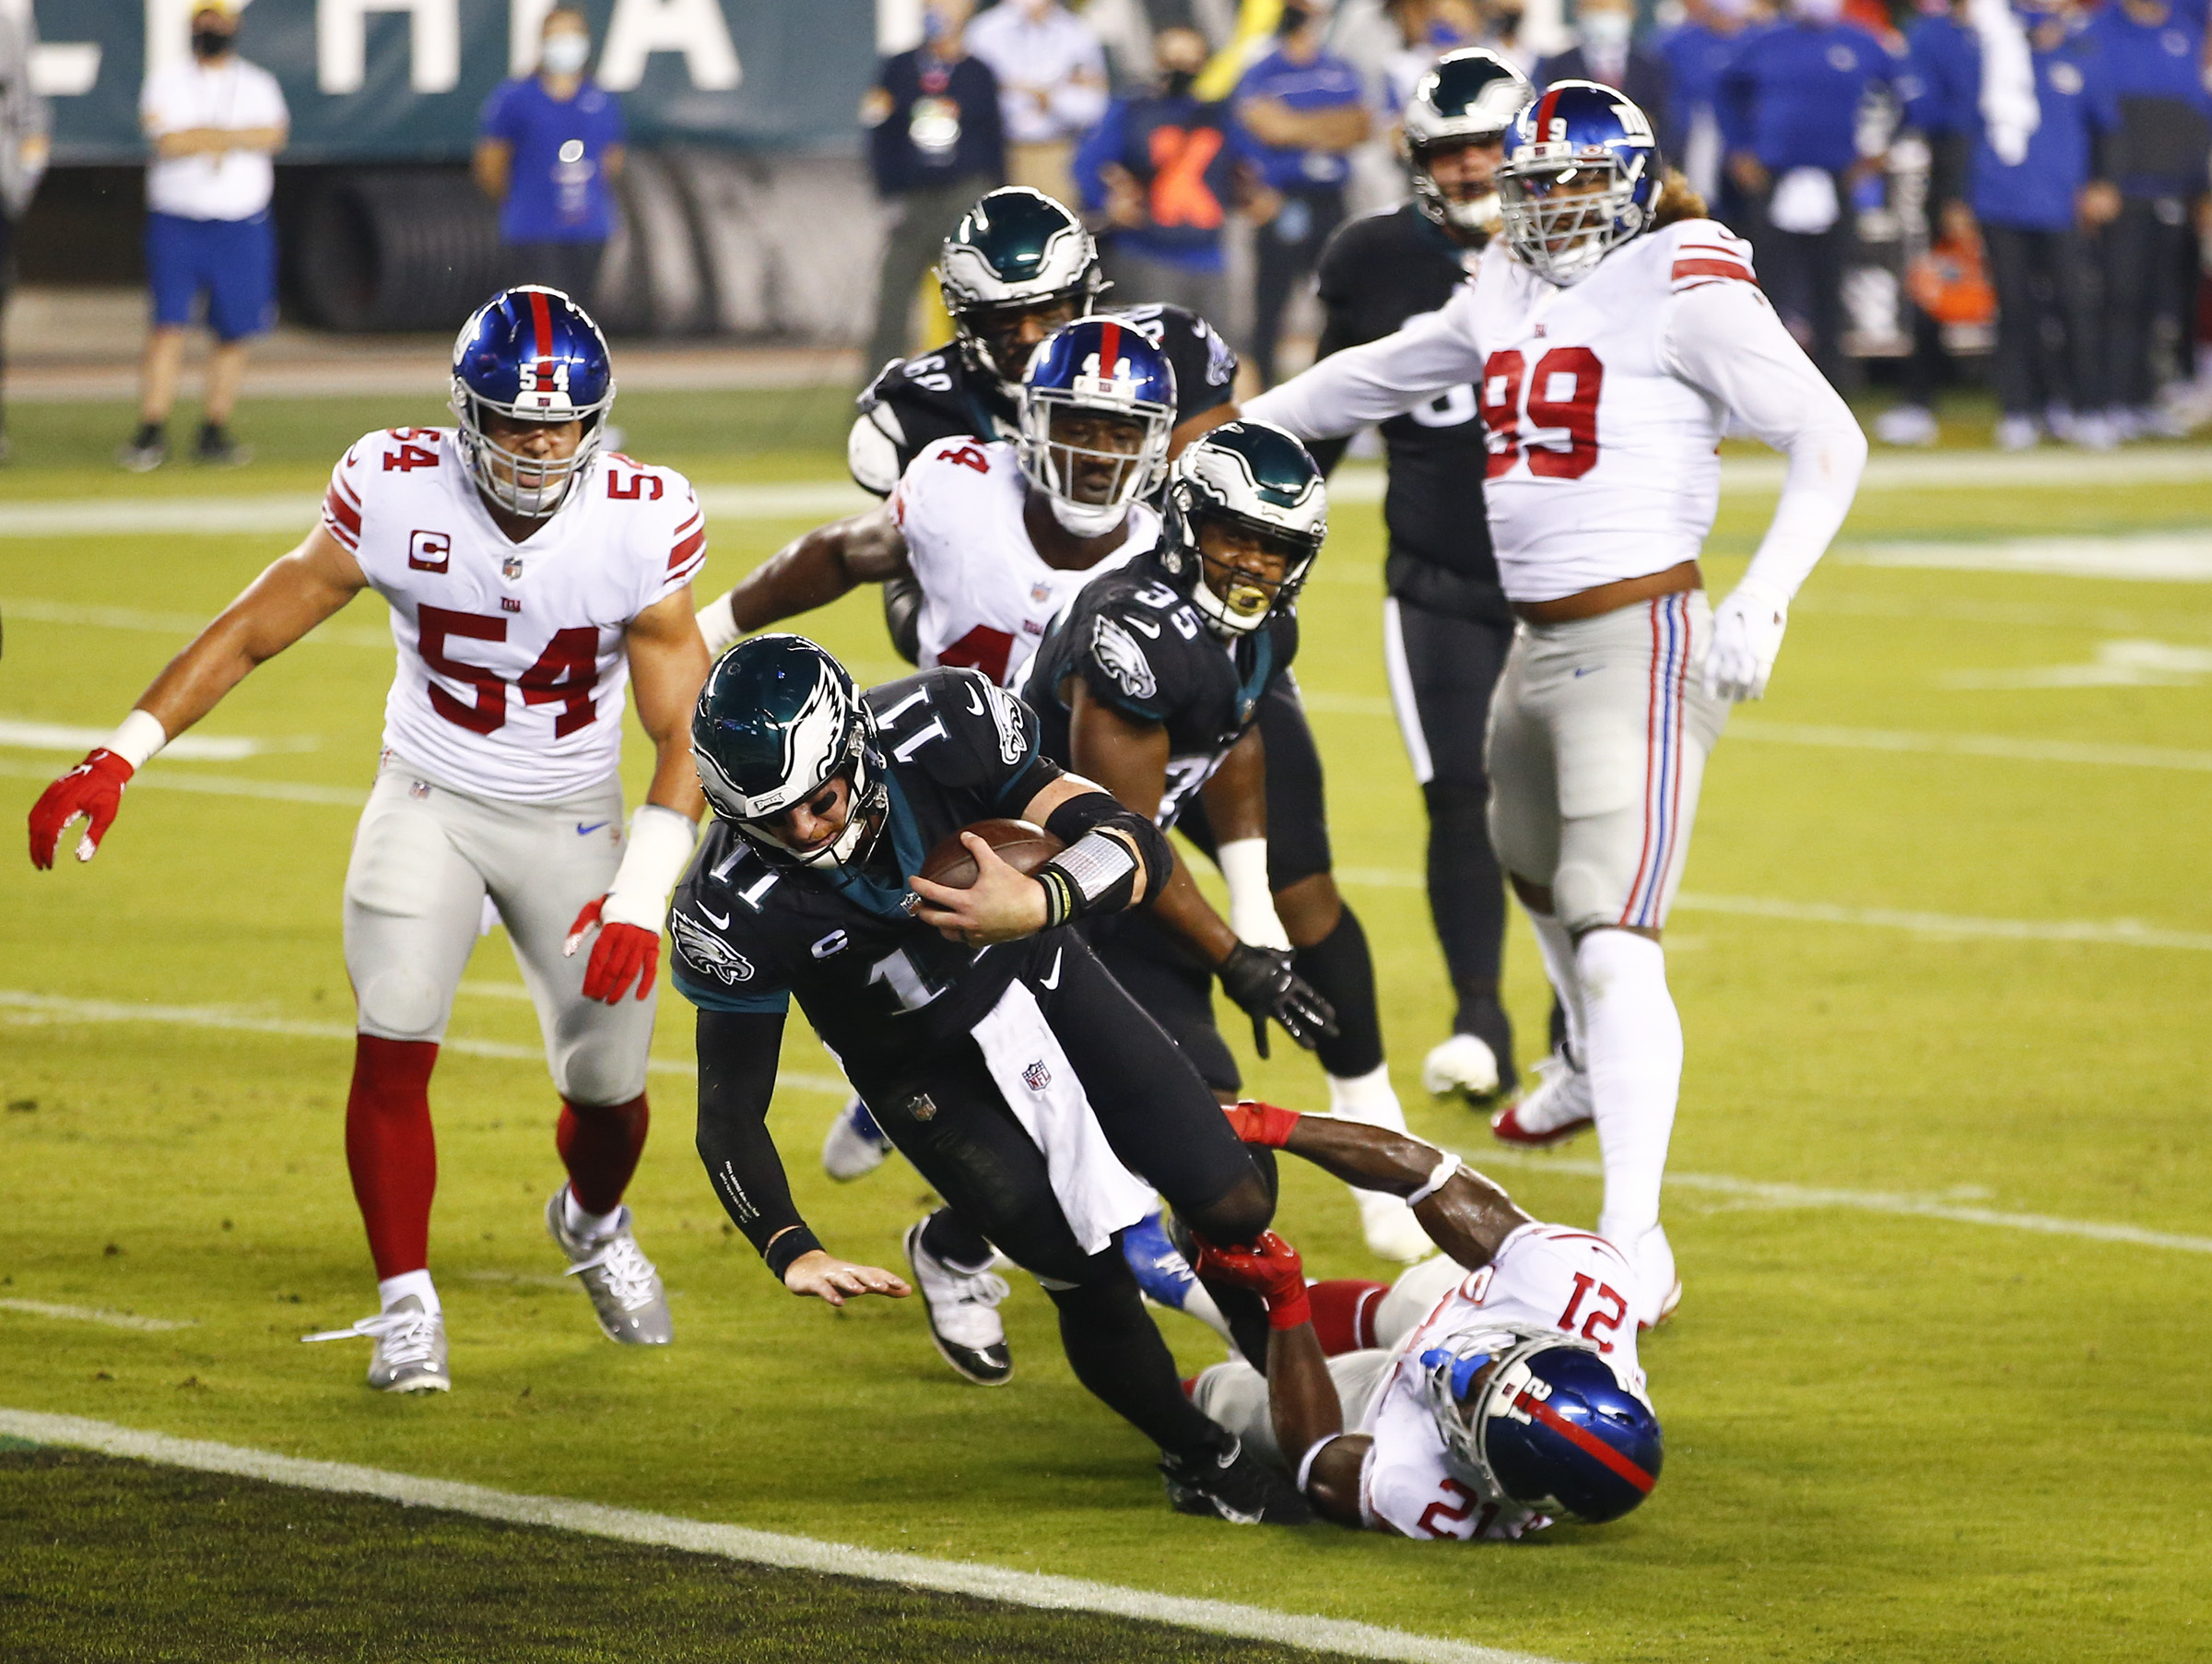 Giants send the Eagles out 42-7 losers - NBC Sports